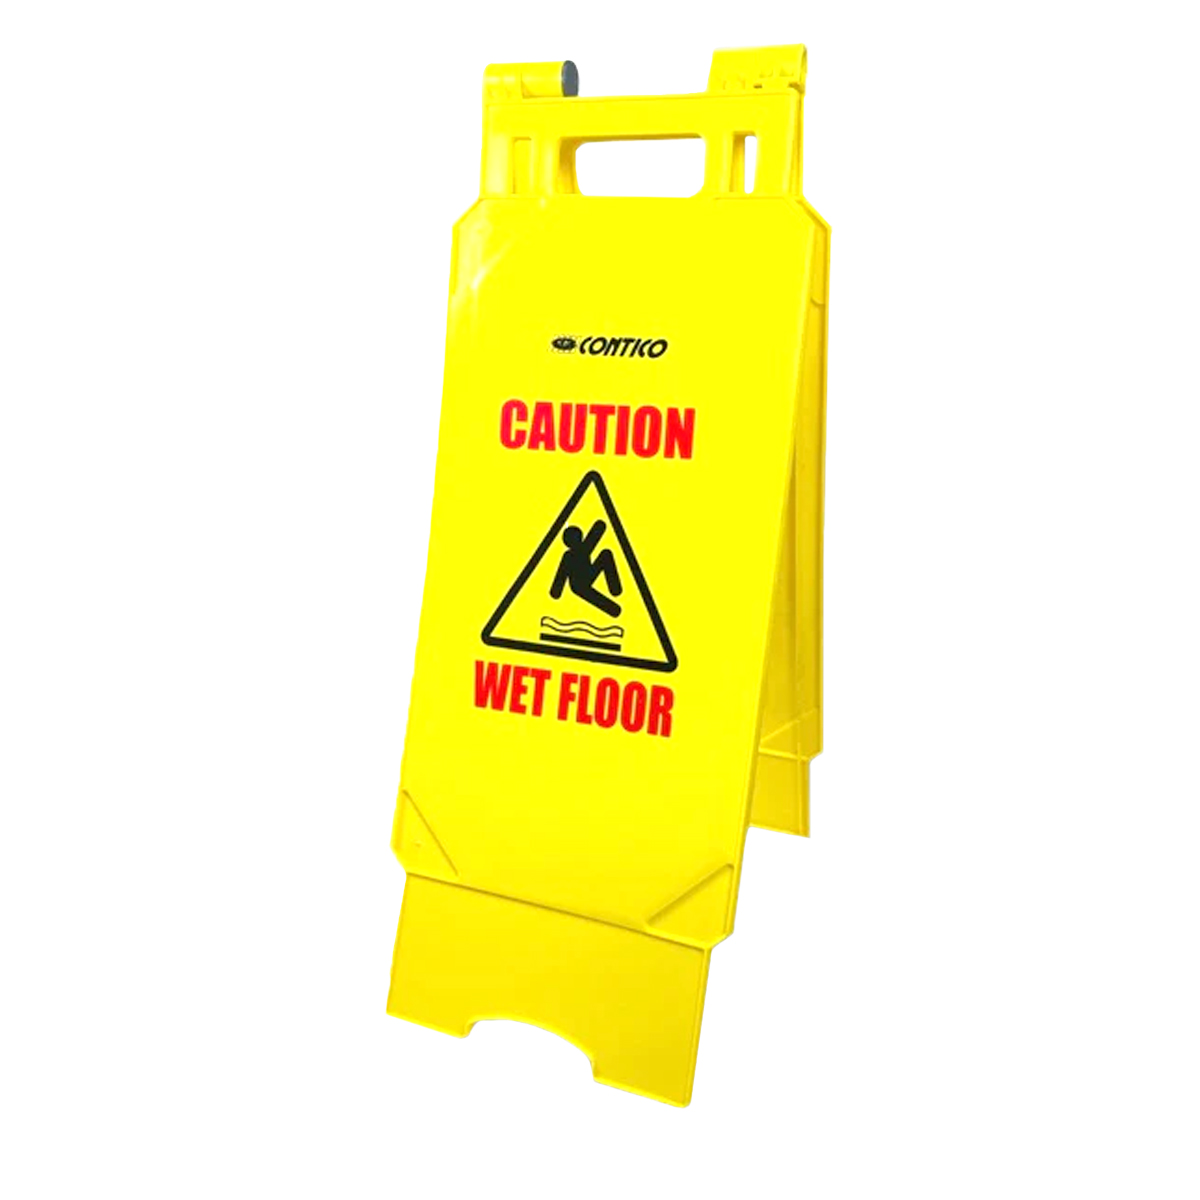 Double sided wet floor signs